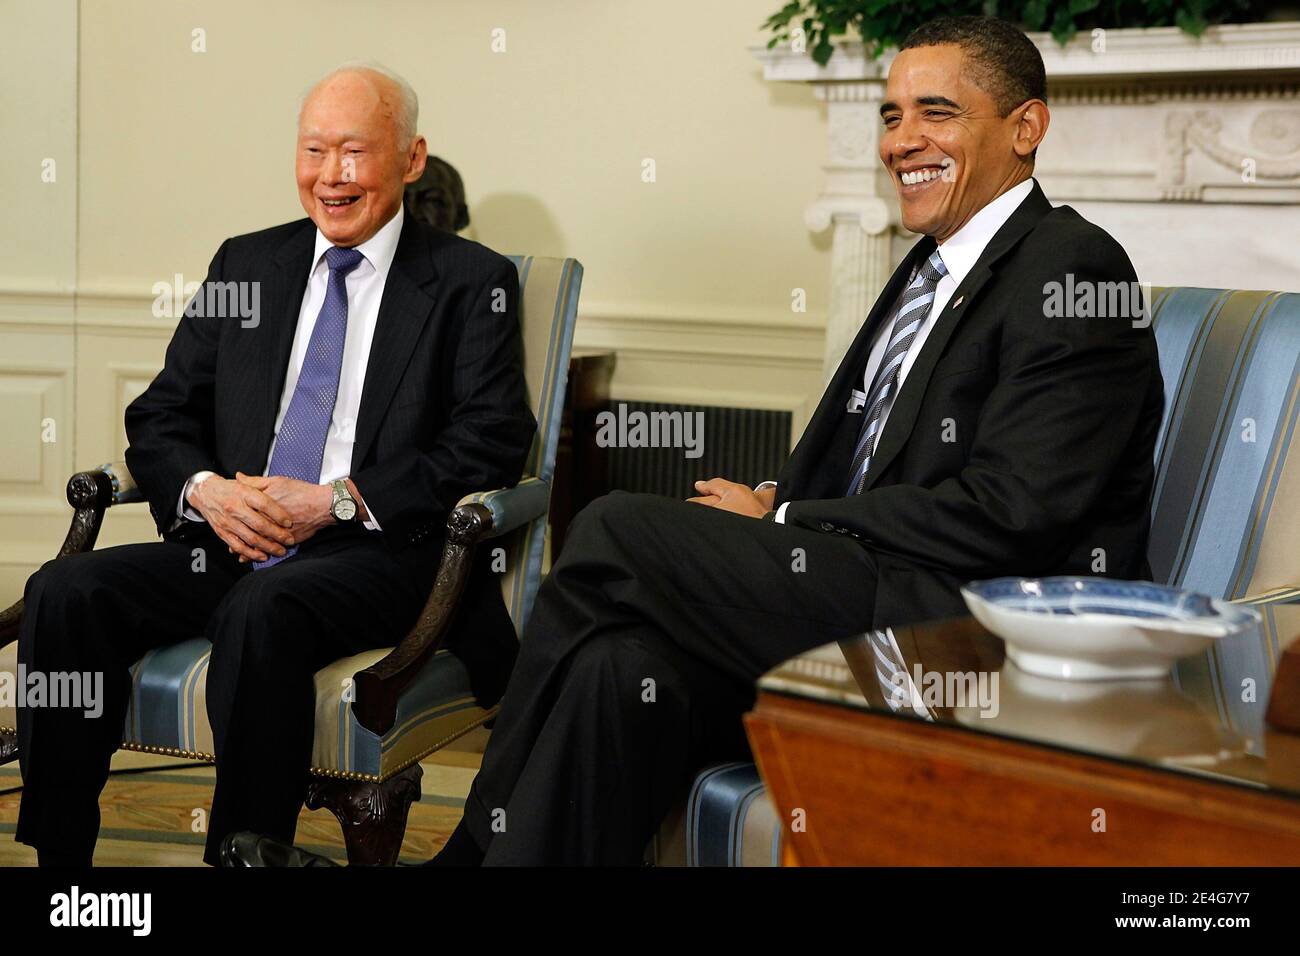 President Barack Obama meets with Minister Mentor Lee Kuan Yew of Singapore in the Oval Office at the White House in Washington, DC on October 29, 2009. Obama will travel to Asia November 11 on a tour which includes the Asia Pacific Economic Cooperation (APEC) summit and a meeting with leaders of the Association of Southeast Asian Nations (ASEAN) in Singapore. Lee served as prime minister of Singapore between 1959 to 1990, and is regarded as an expert on Asian affairs and US relations with the region. Photo by Chip Somodevilla/ABACAPRESS.COM Stock Photo